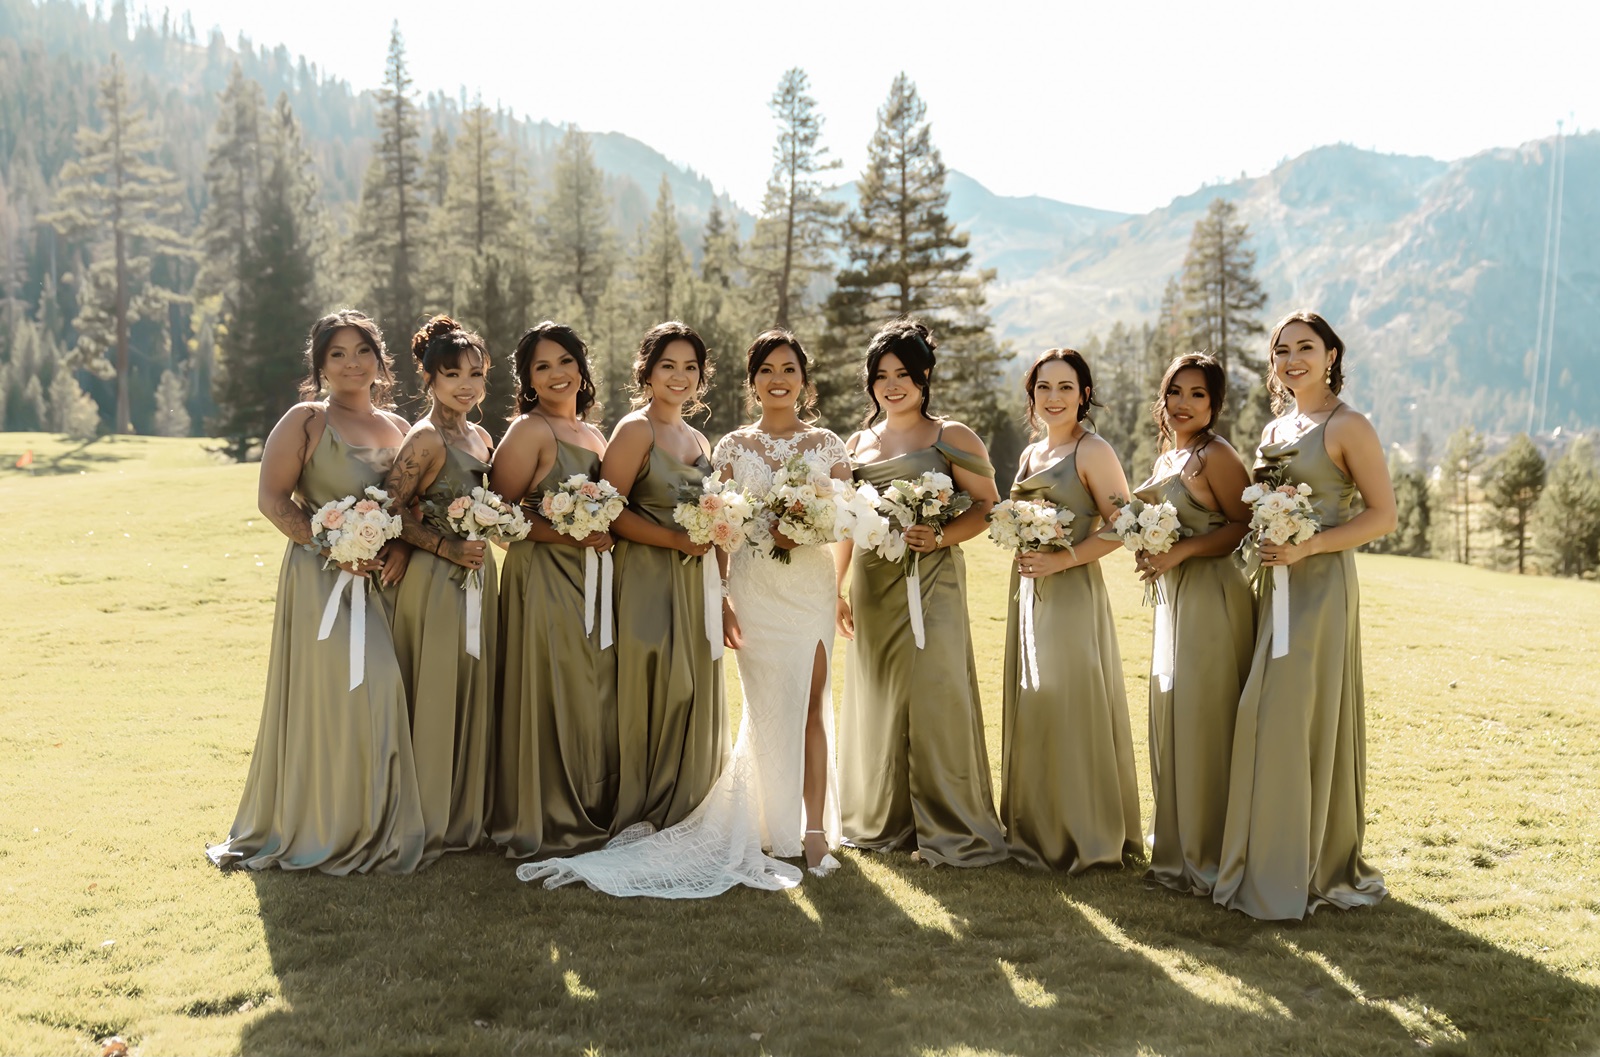 Bridesmaids in green satin dresses smile with the mountains as the backdrop